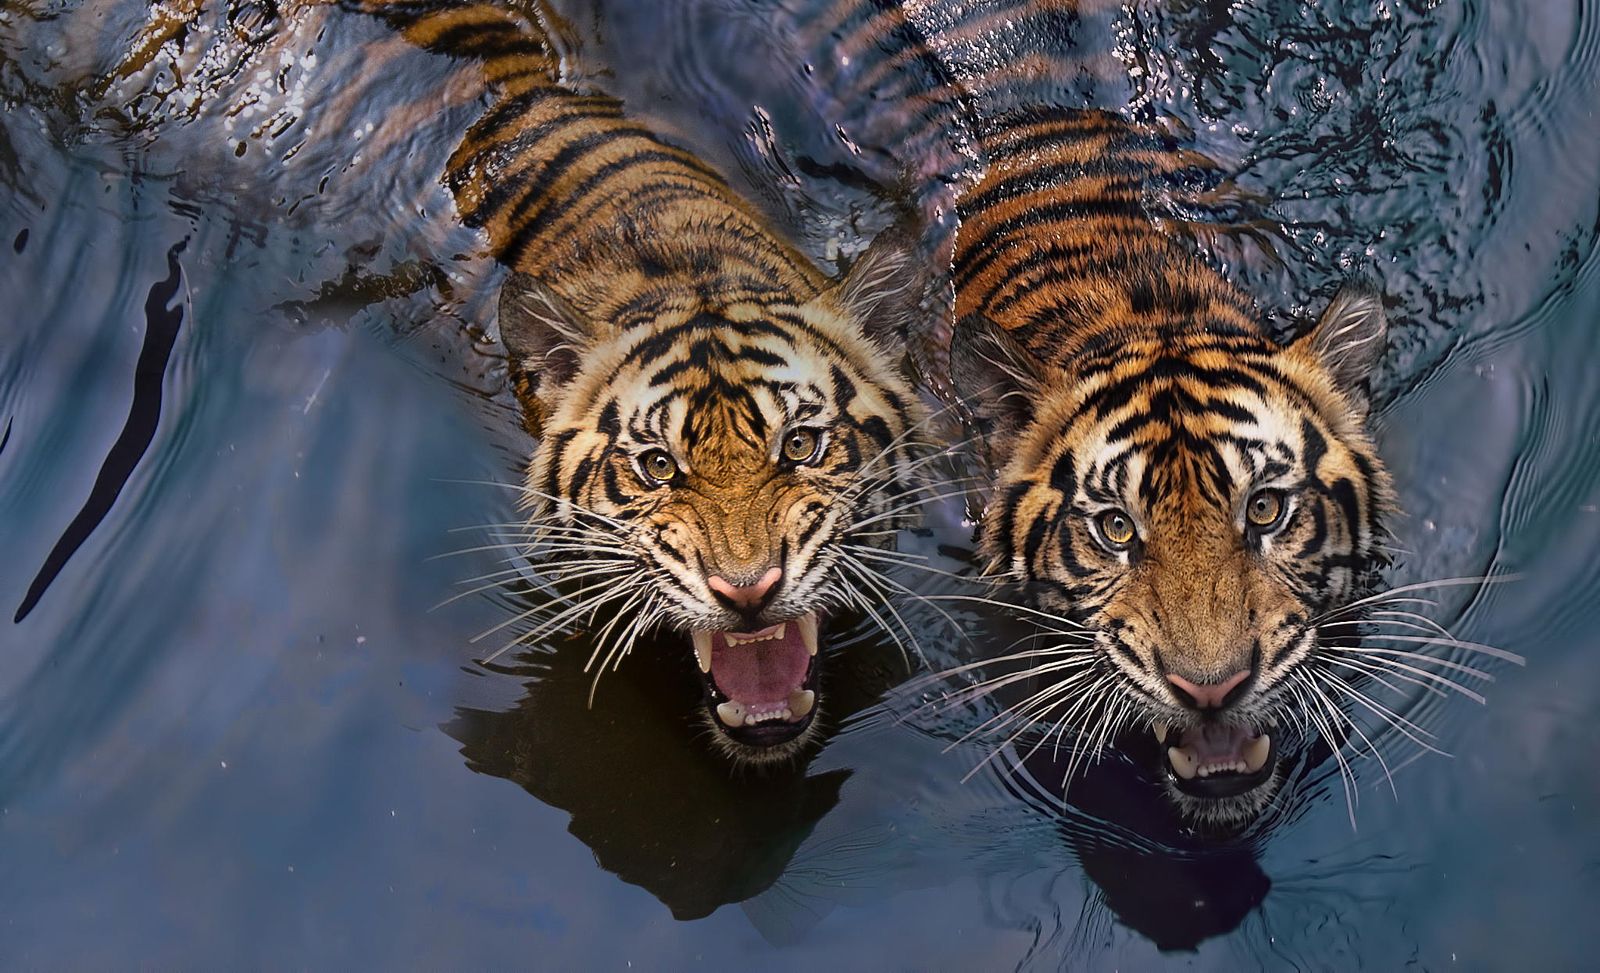 Tiger Photography. Tigers Photo That Will Leave You